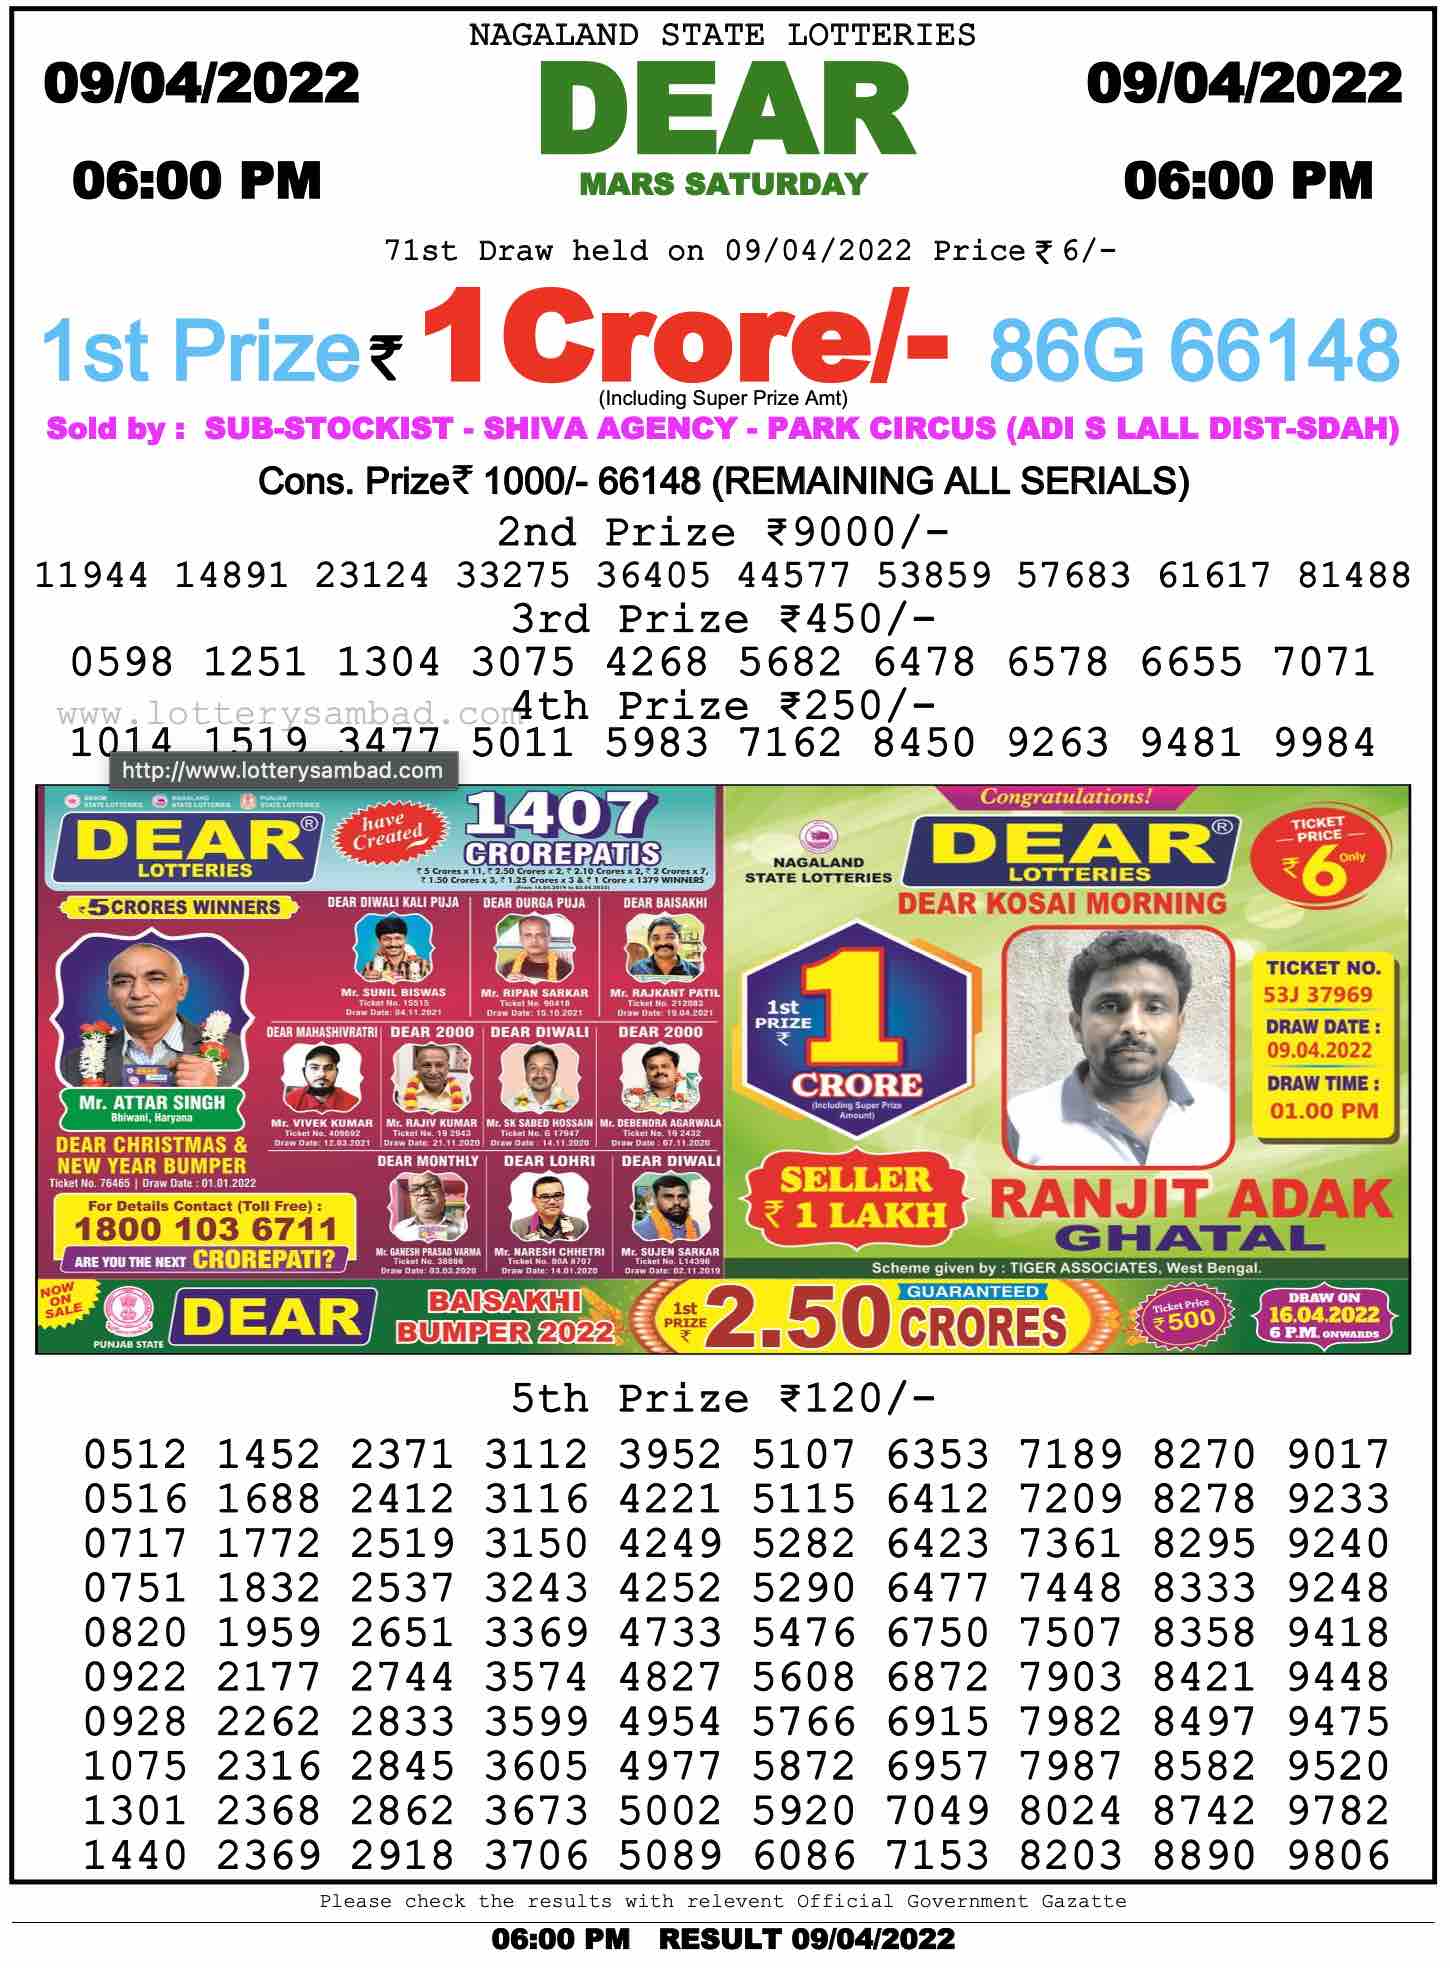 Download Result of Nagaland State Dear 6 09-04-2022 Draw at 6:00Pm